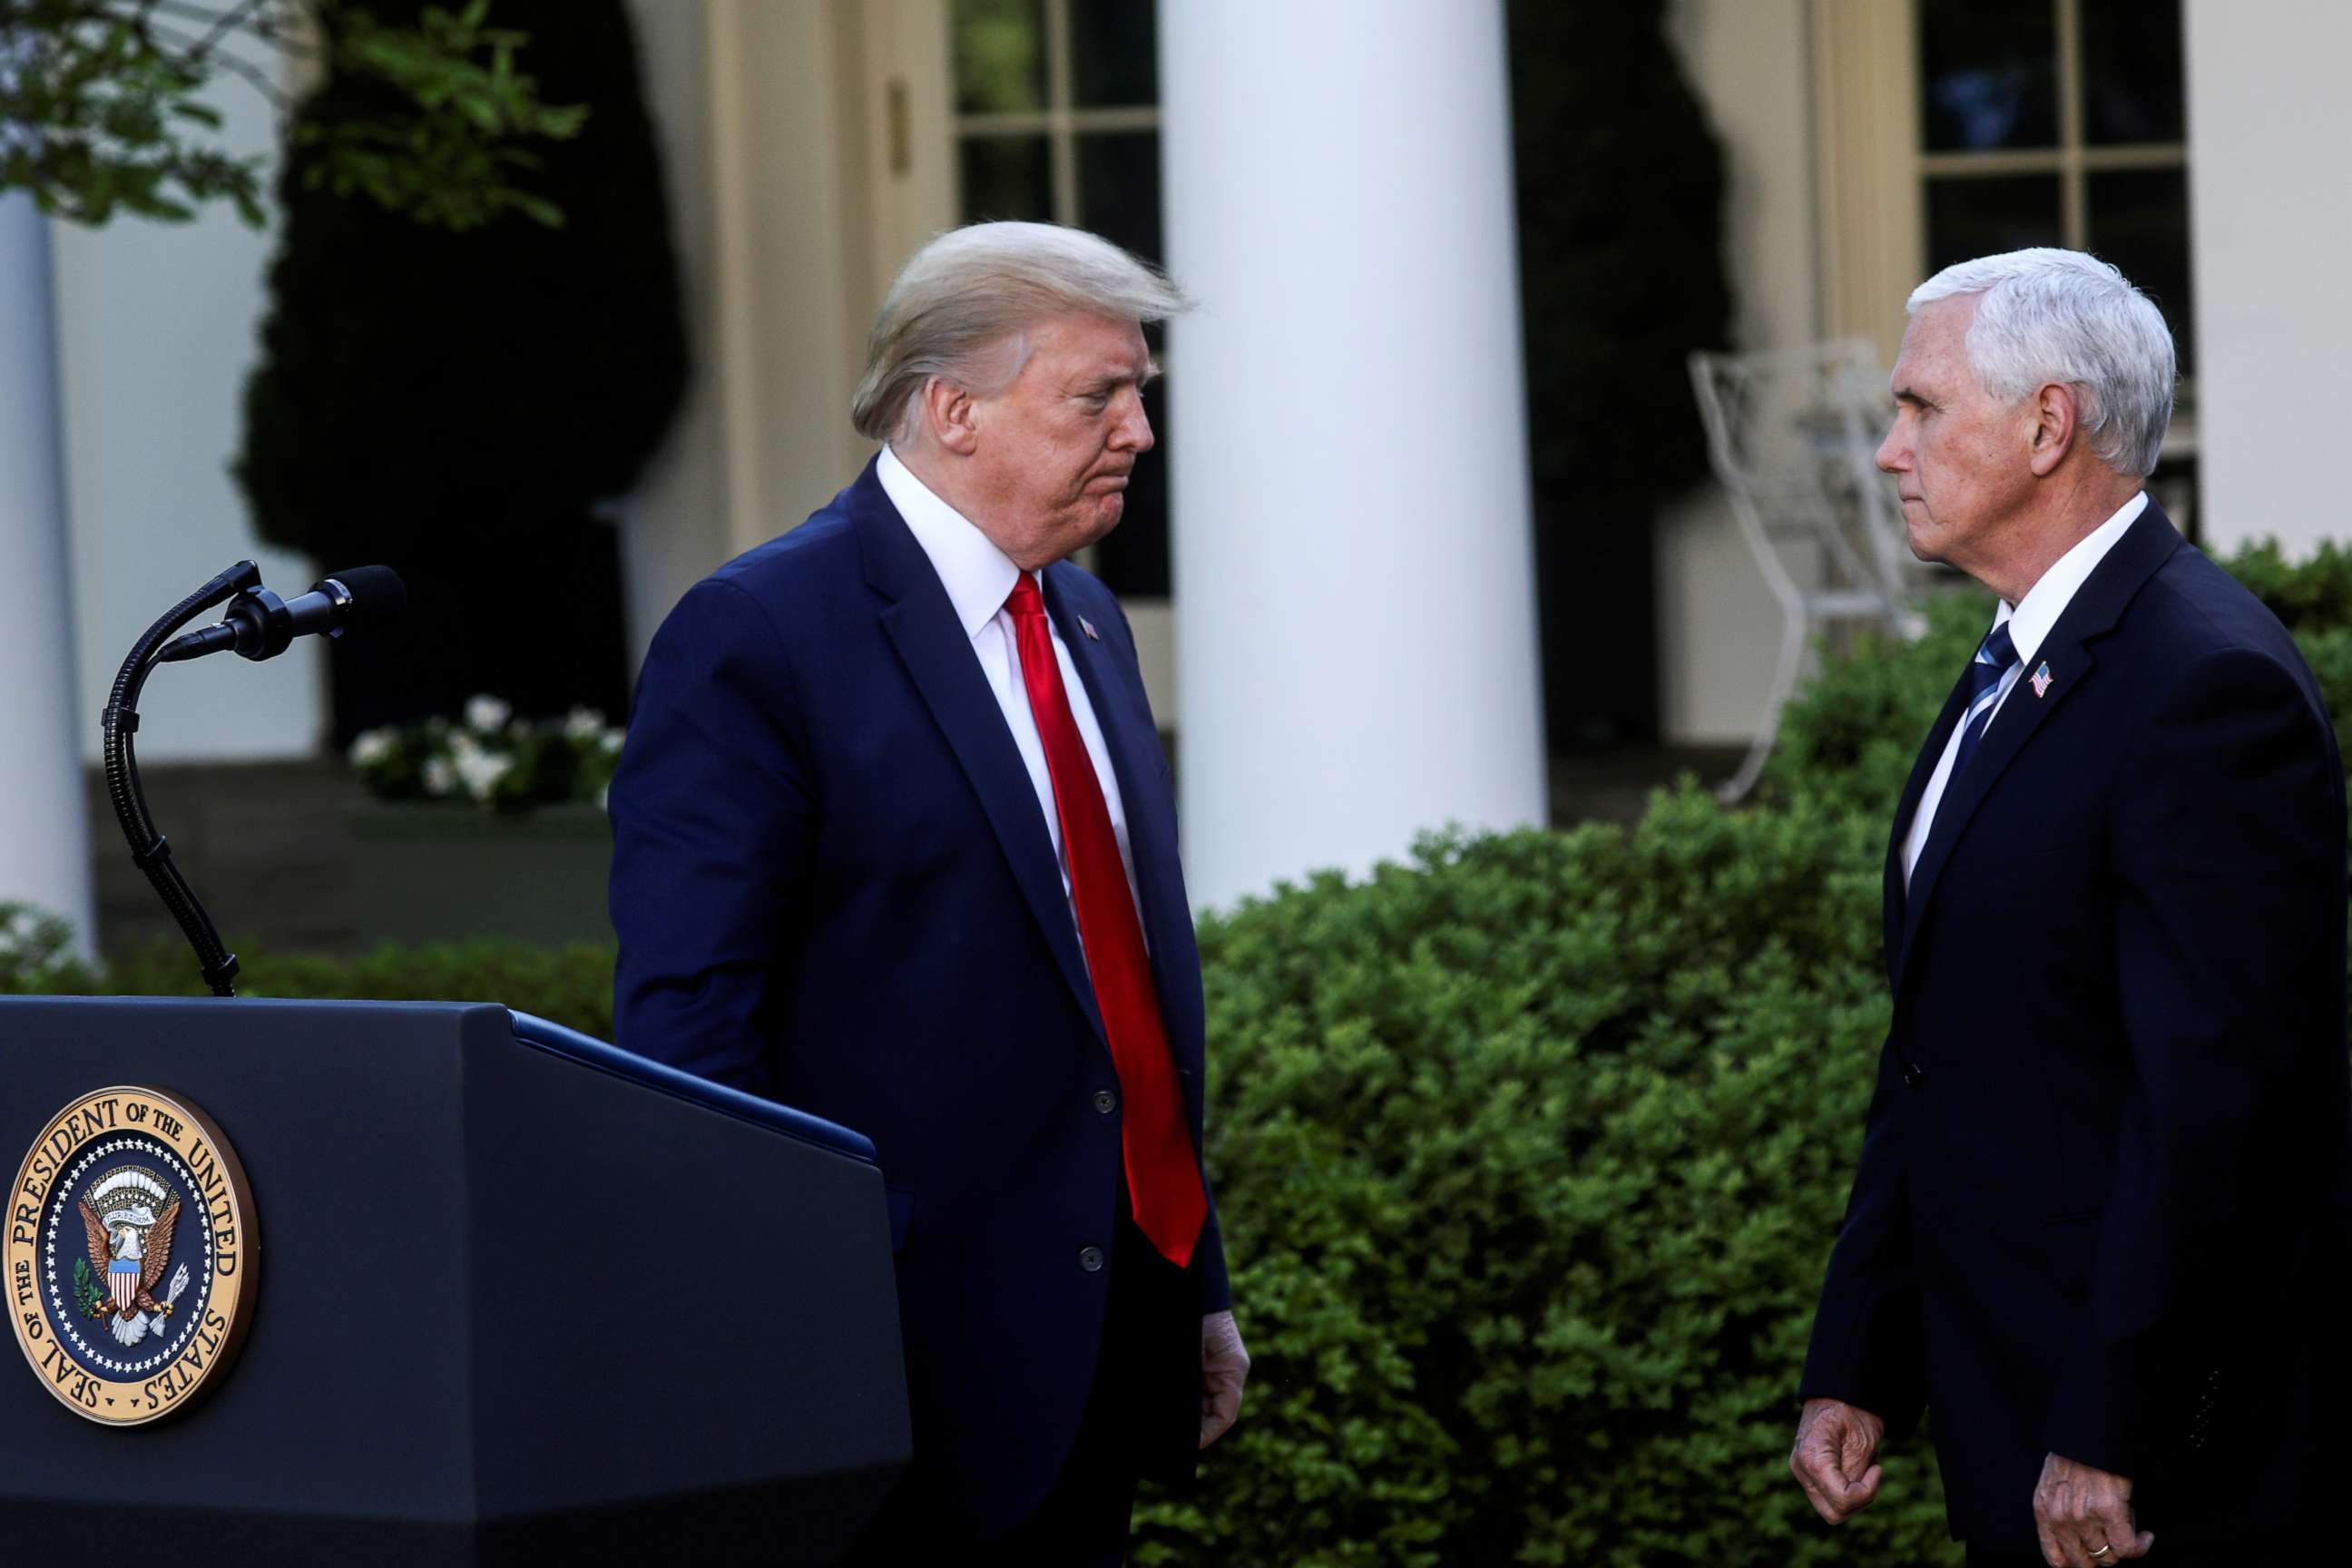 PHOTO: U.S. President Donald Trump turns to Vice President Mike Pence as they depart following a coronavirus response news conference in the Rose Garden at the White House in Washington, D.C., on April 27, 2020.